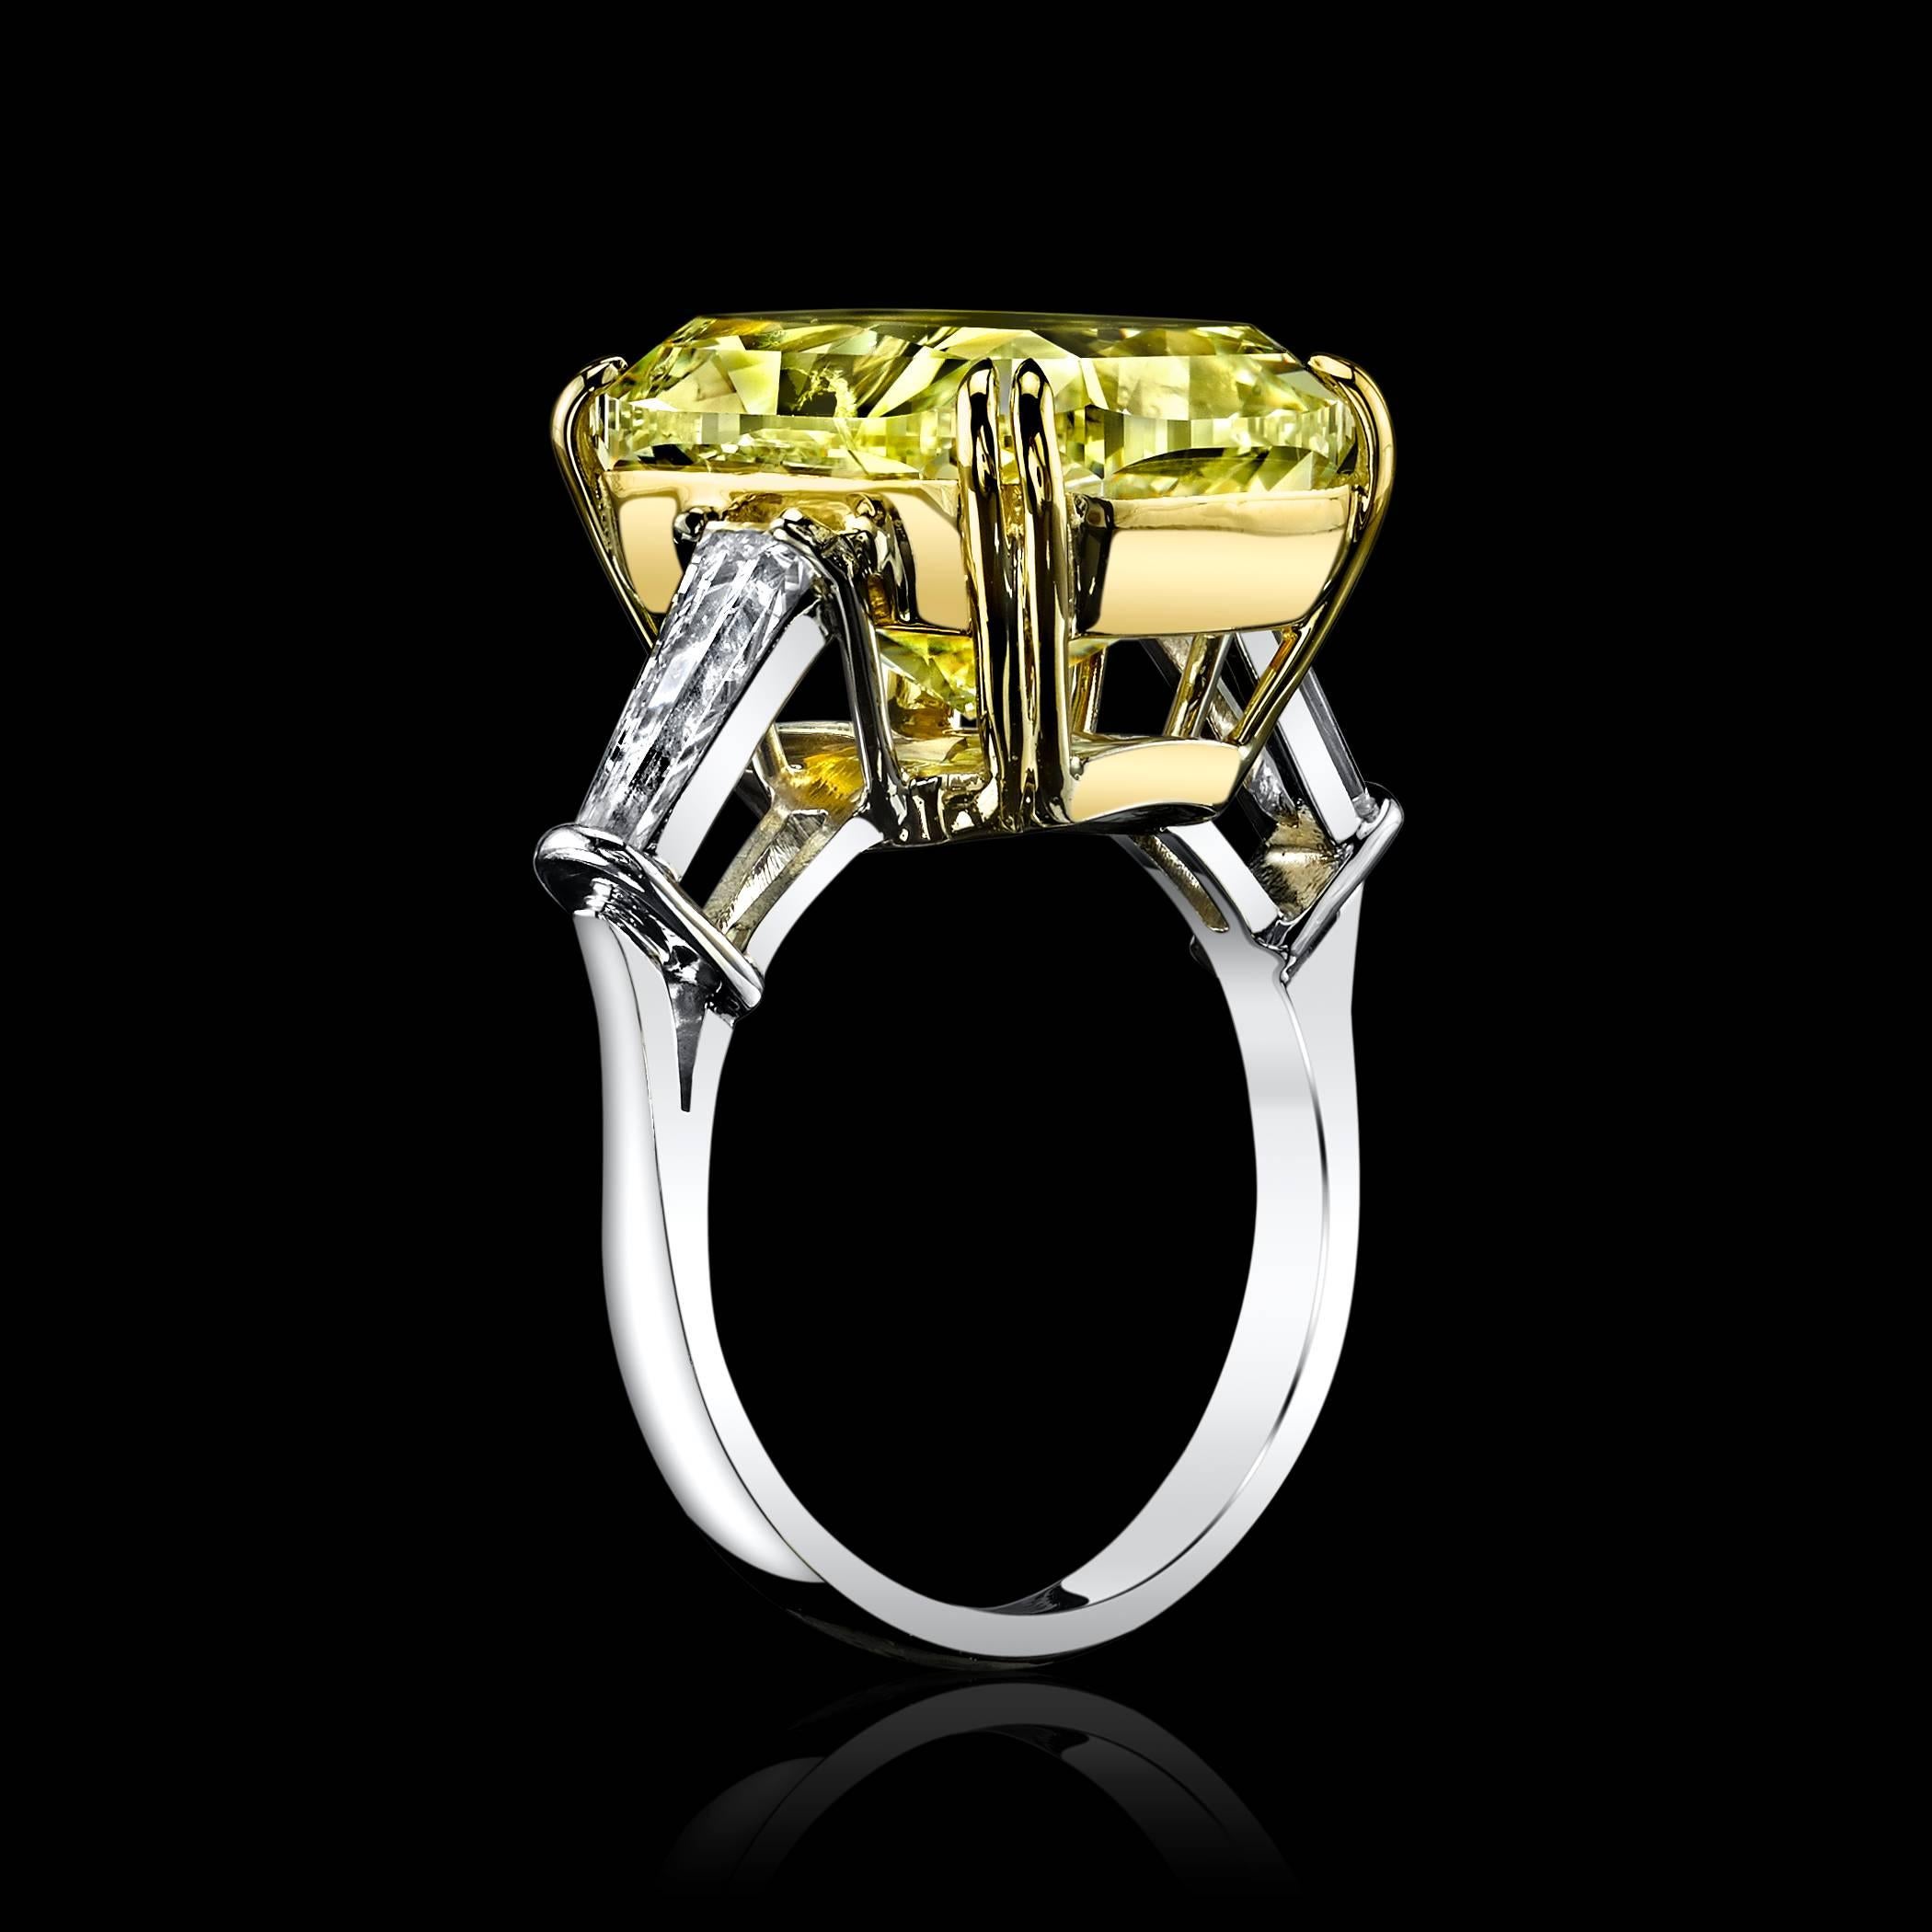 This 17.49 Fancy Light Yellow Diamond Ring is a one-of-a-kind special ring. The center stone is a beautiful Canary Yellow Diamond set in Platinum and 18K Yellow gold, adorned by a pair of tapered colorless Diamonds on both sides. The center stone is